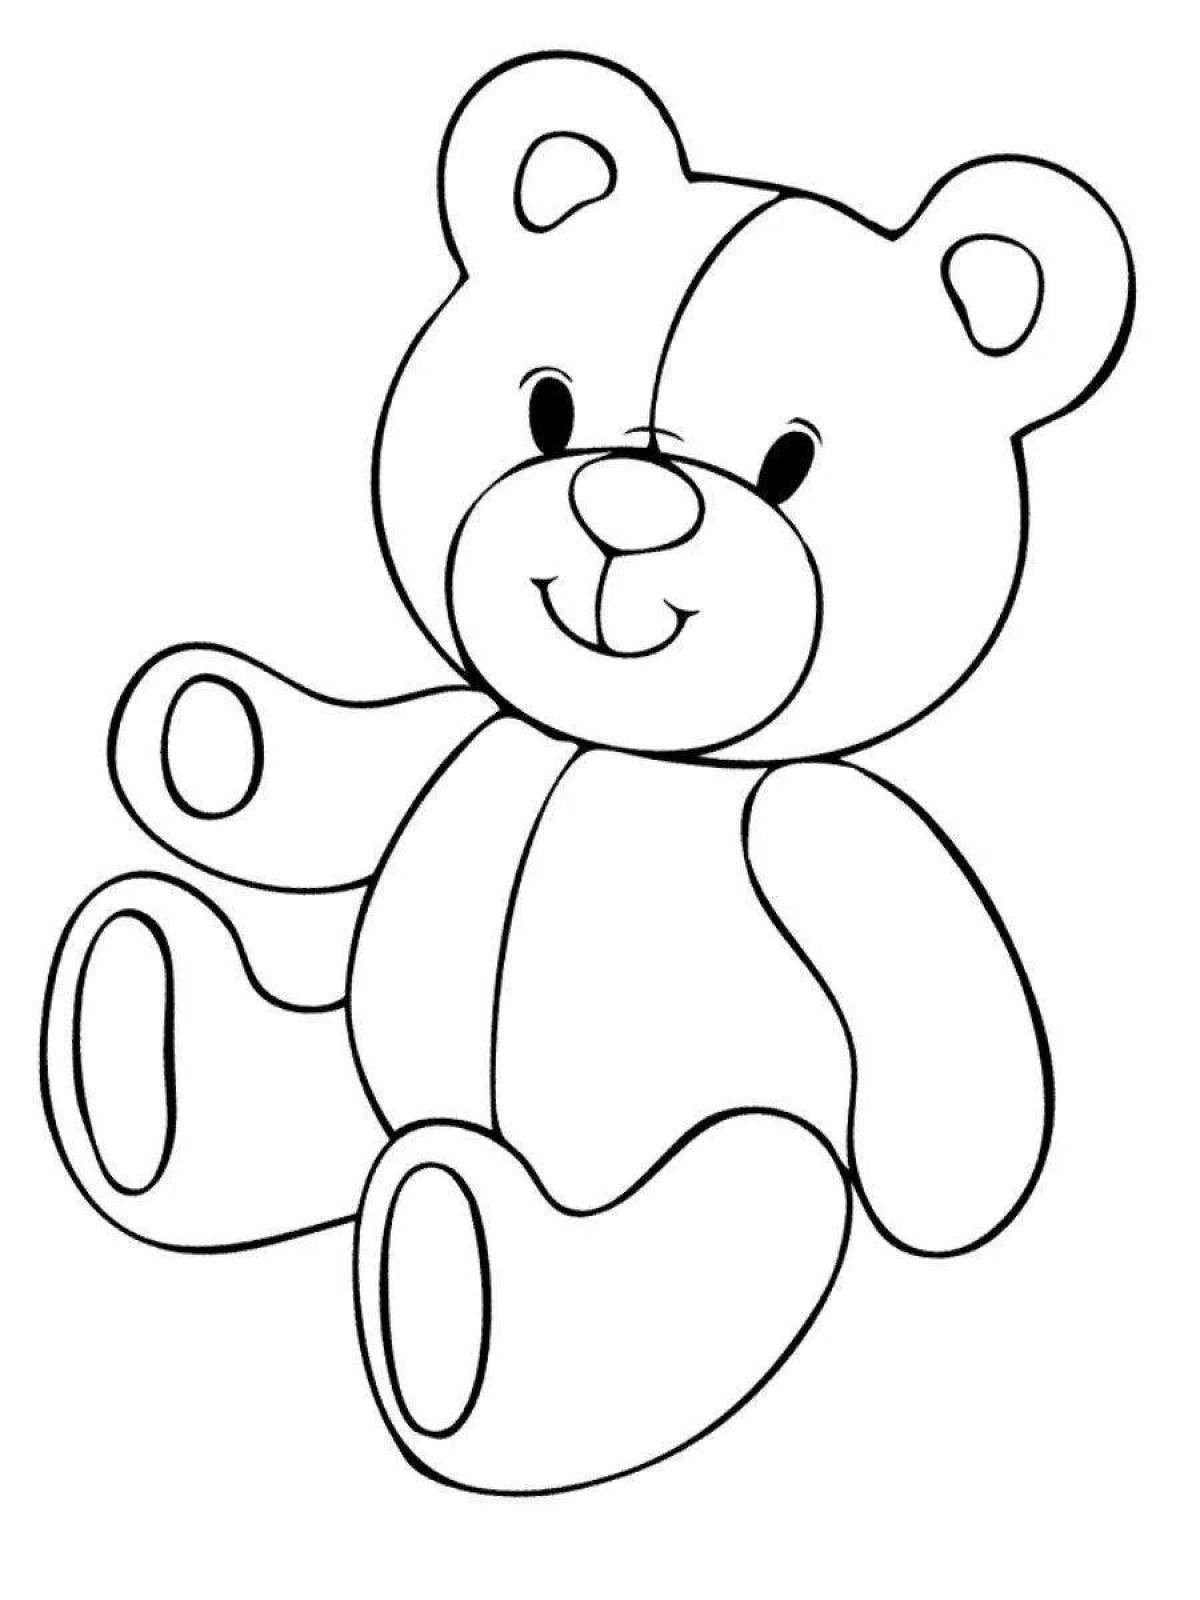 Great coloring bear for children 5-6 years old